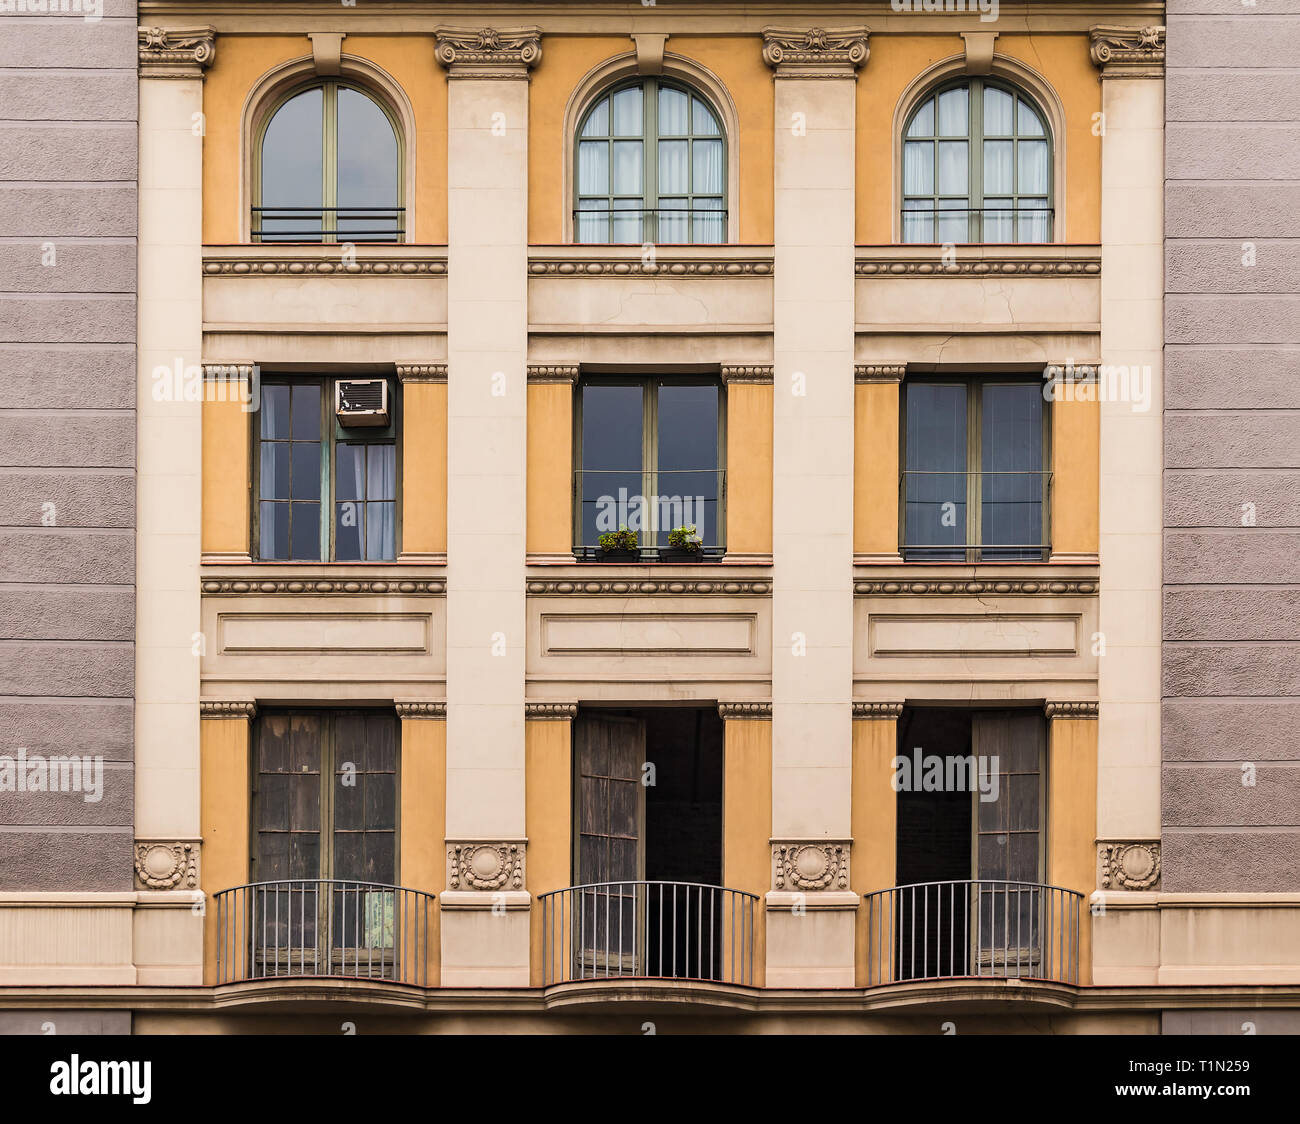 Several windows and balconies in a row on the facade of the urban historic building front view, Barcelona, Spain Stock Photo